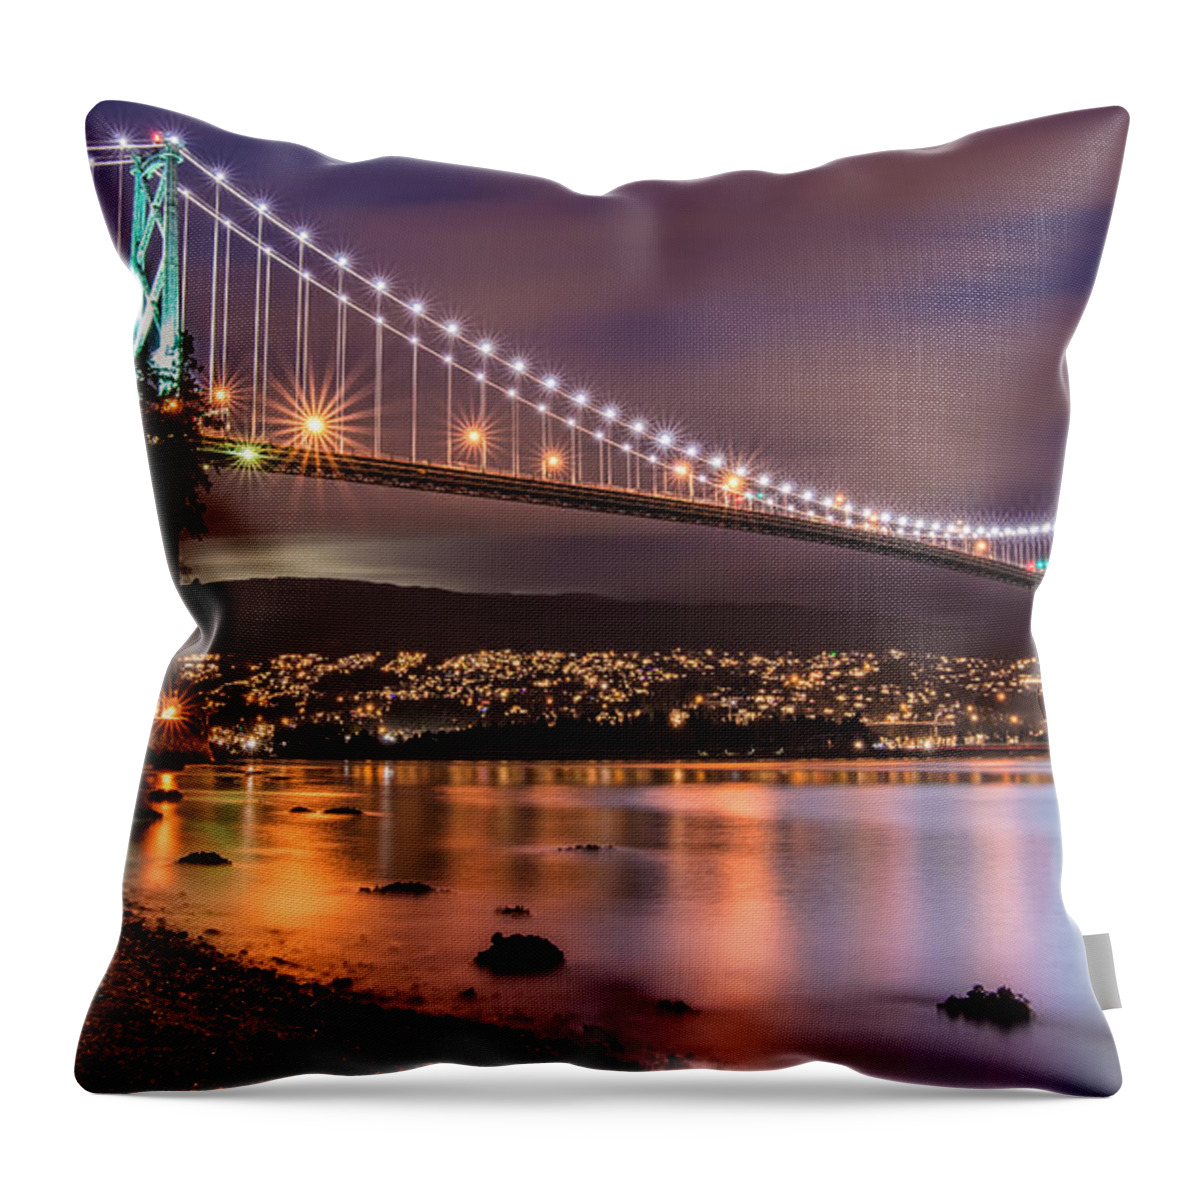 Beautiful Throw Pillow featuring the photograph Lions Gate Bridge at Night by James Wheeler